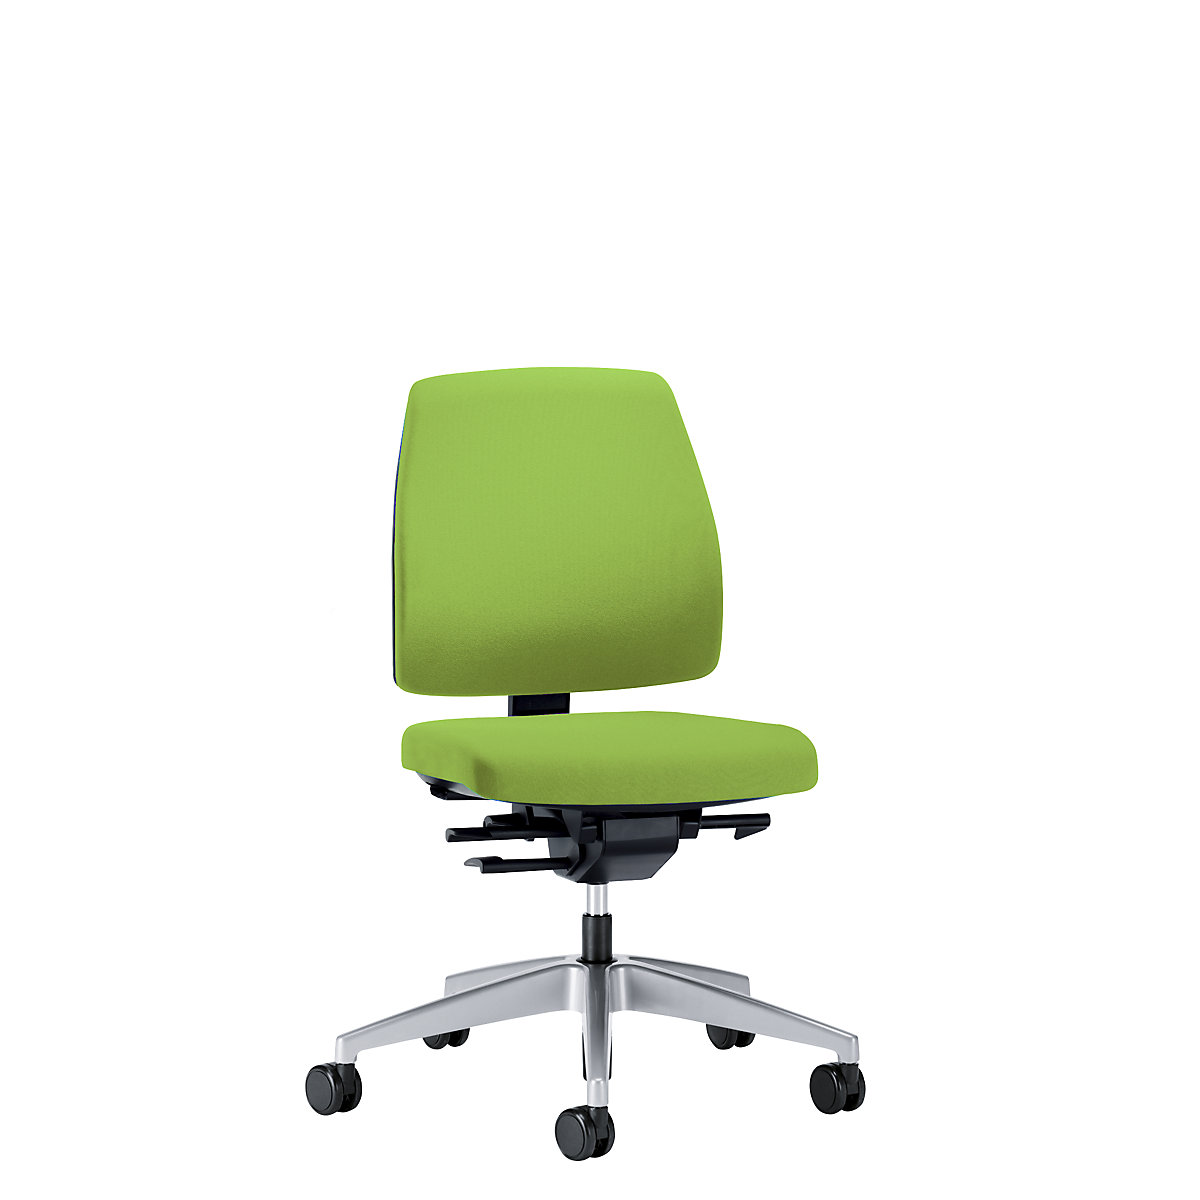 GOAL office swivel chair, back rest height 430 mm – interstuhl, brilliant silver frame, with hard castors, yellow green, seat depth 410 mm-4